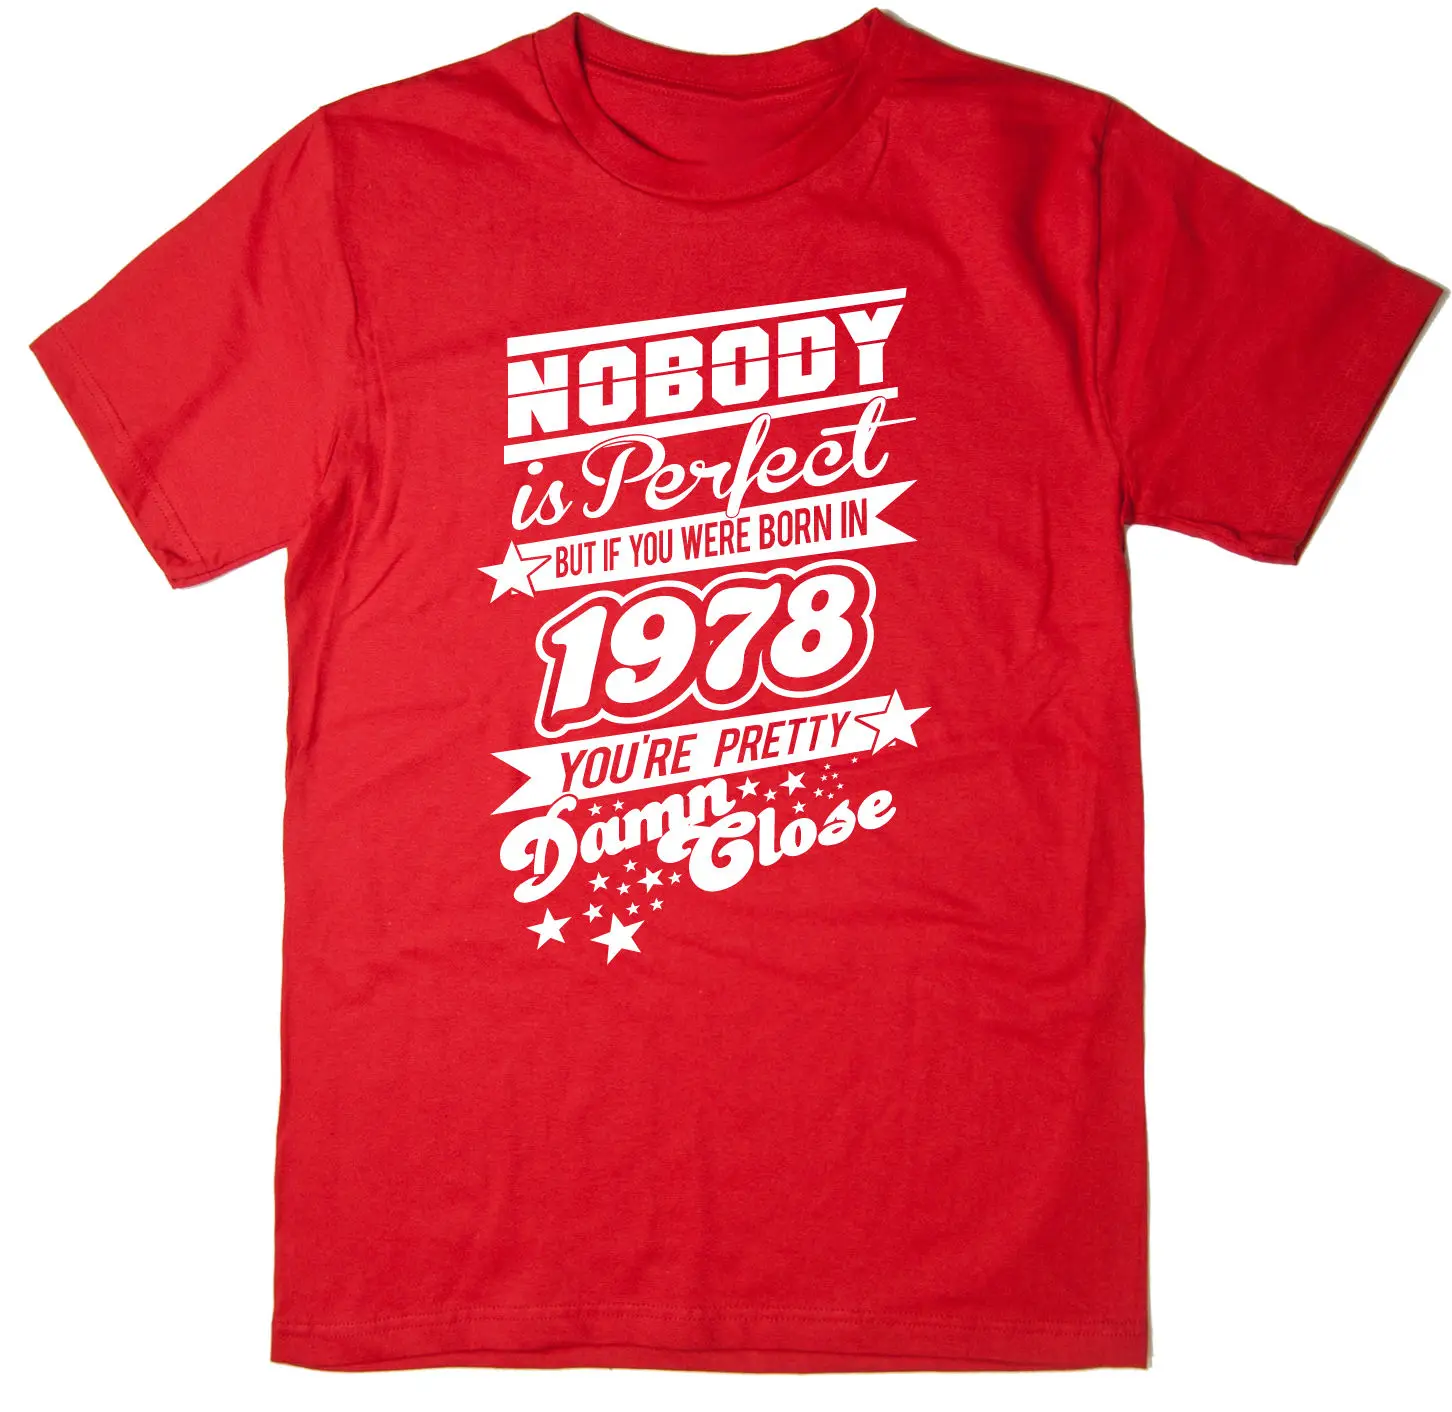 

2019 Hot sale Free shipping Nobody Is Perfect - Born in 1978 - Mens Funny Printed T-Shirt - Many Colours